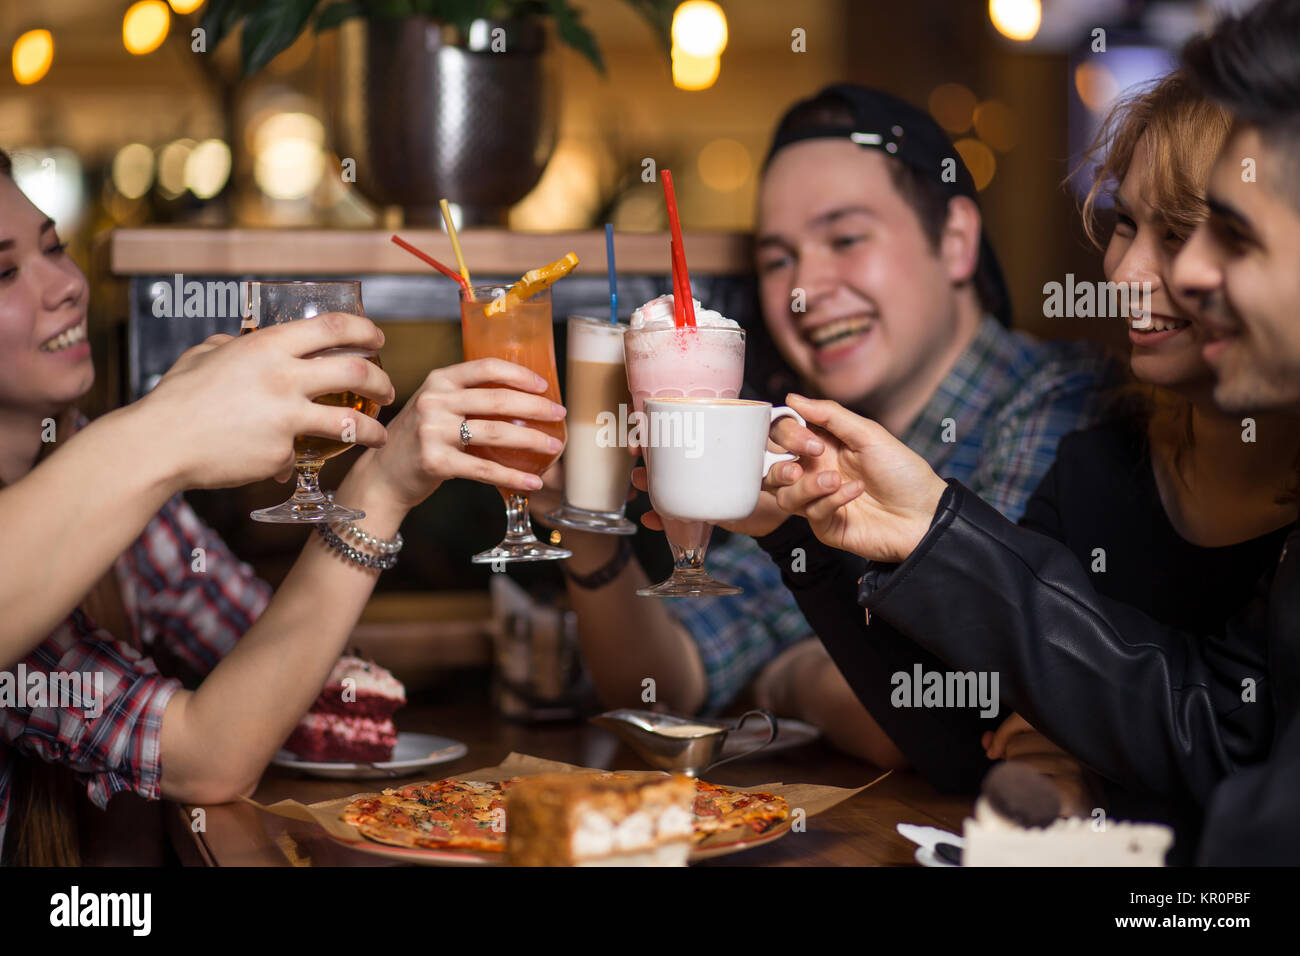 People Meeting Friendship Togetherness Coffee Shop Concept Stock Photo